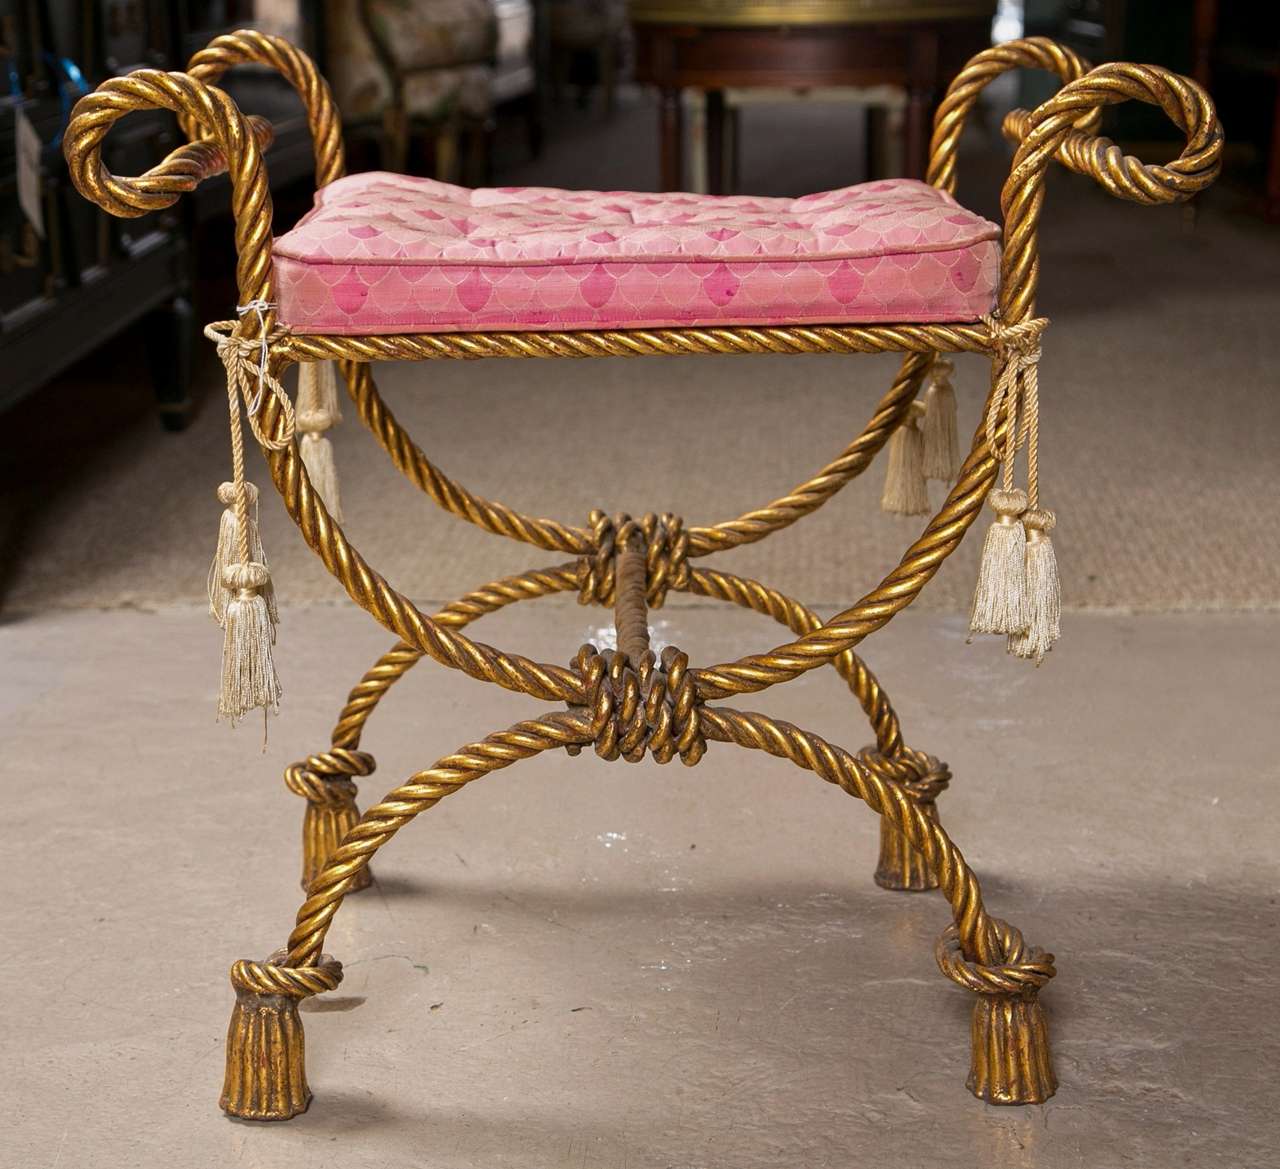 A wonderful pair of Italian gilt tassel form decorated stools. Each made of brass twisted metal standing on tassel knotted feet leading to a double C roped frame. Each cushion supported by a metal tweed seat.